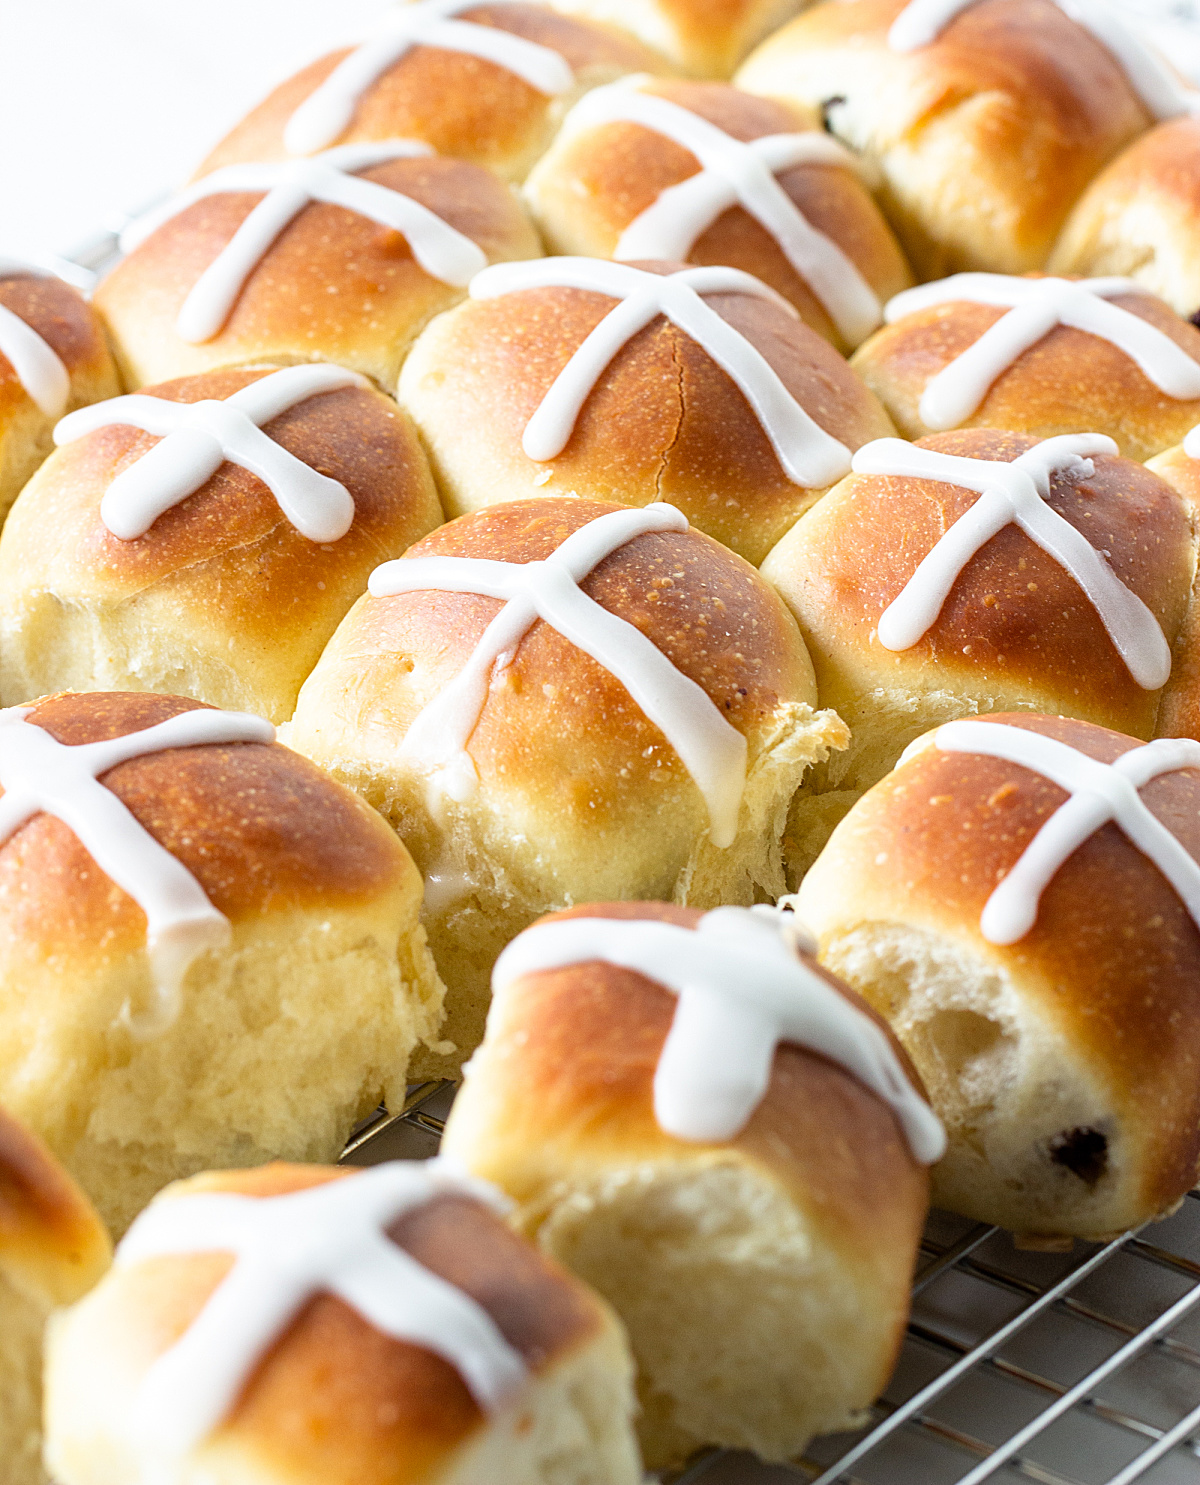 Small buns with white cross on top